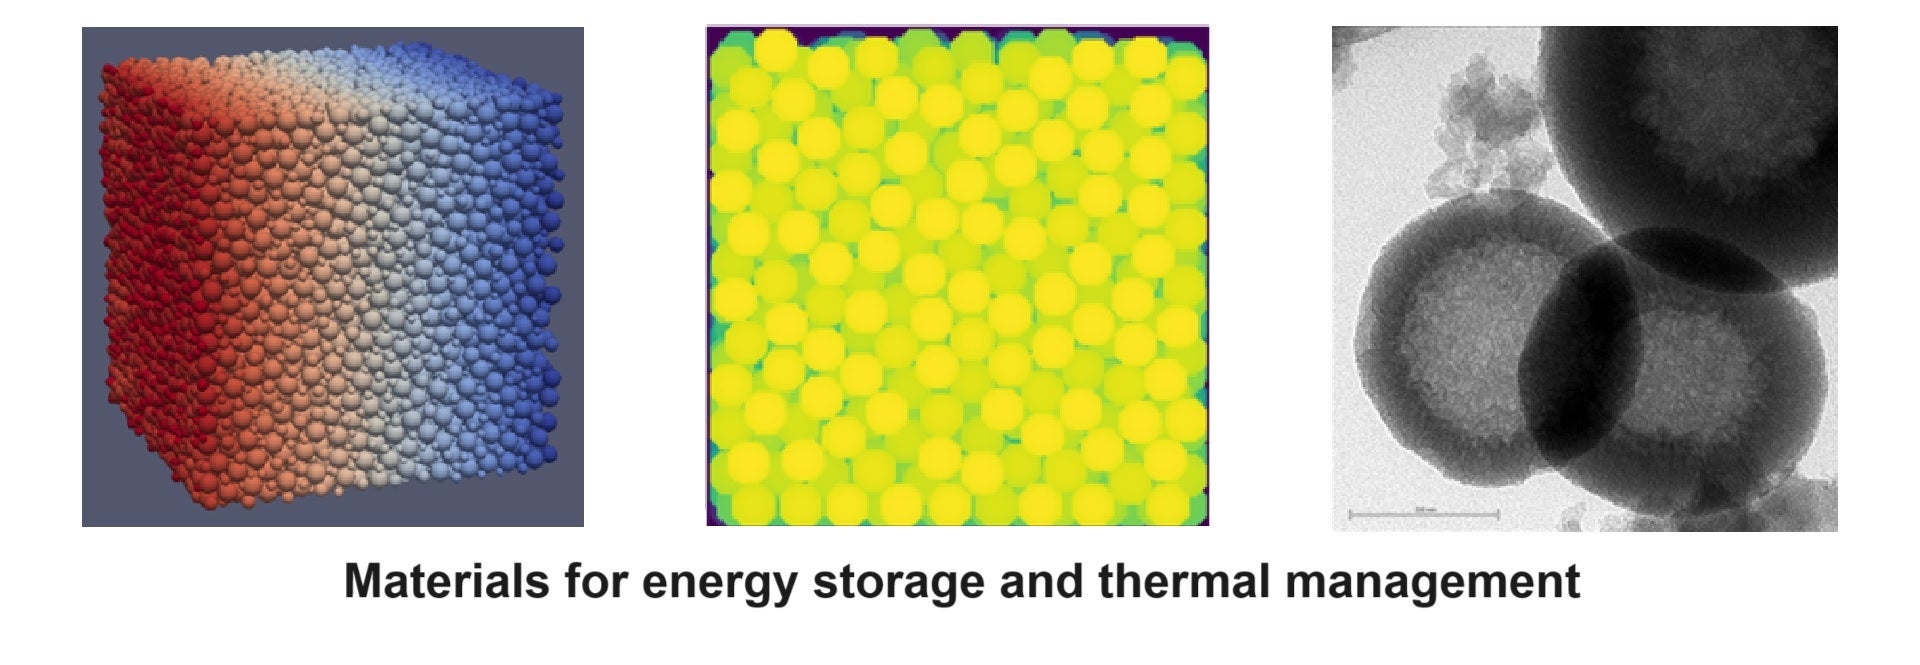 a schematic showing thermal energy storage materials